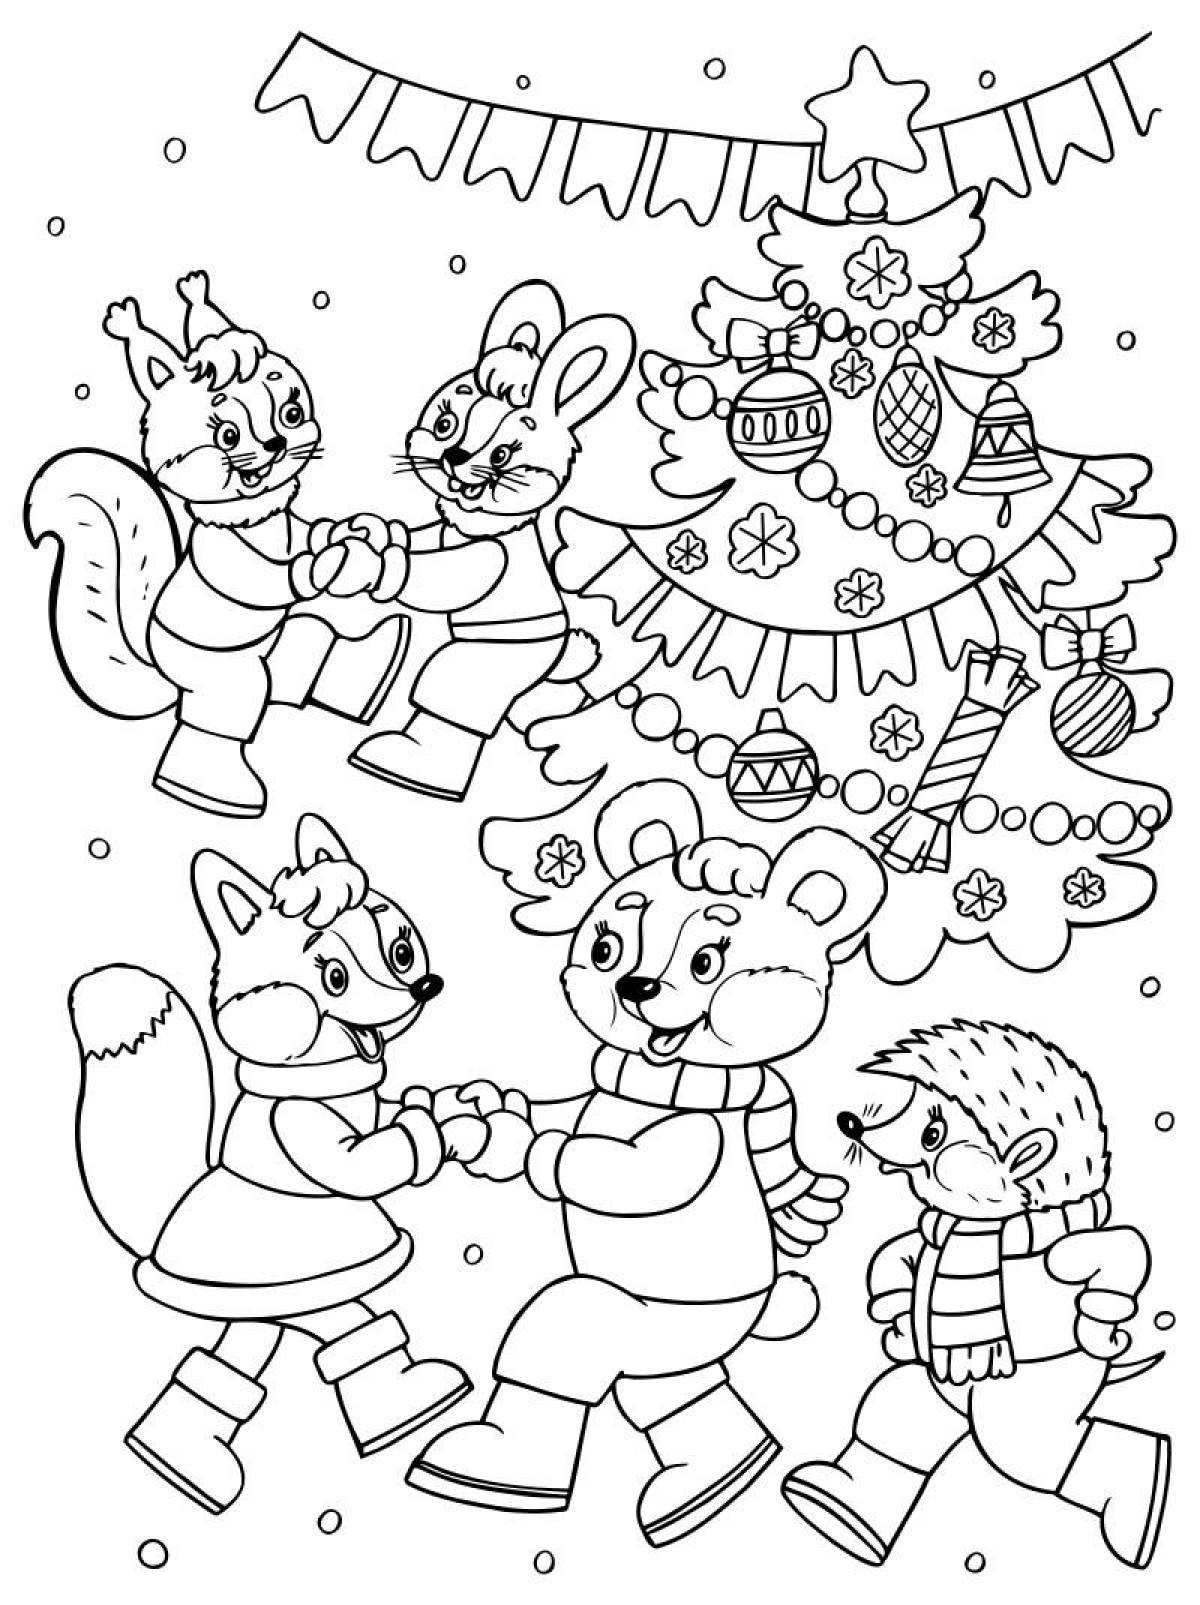 Exquisite children's Christmas coloring book